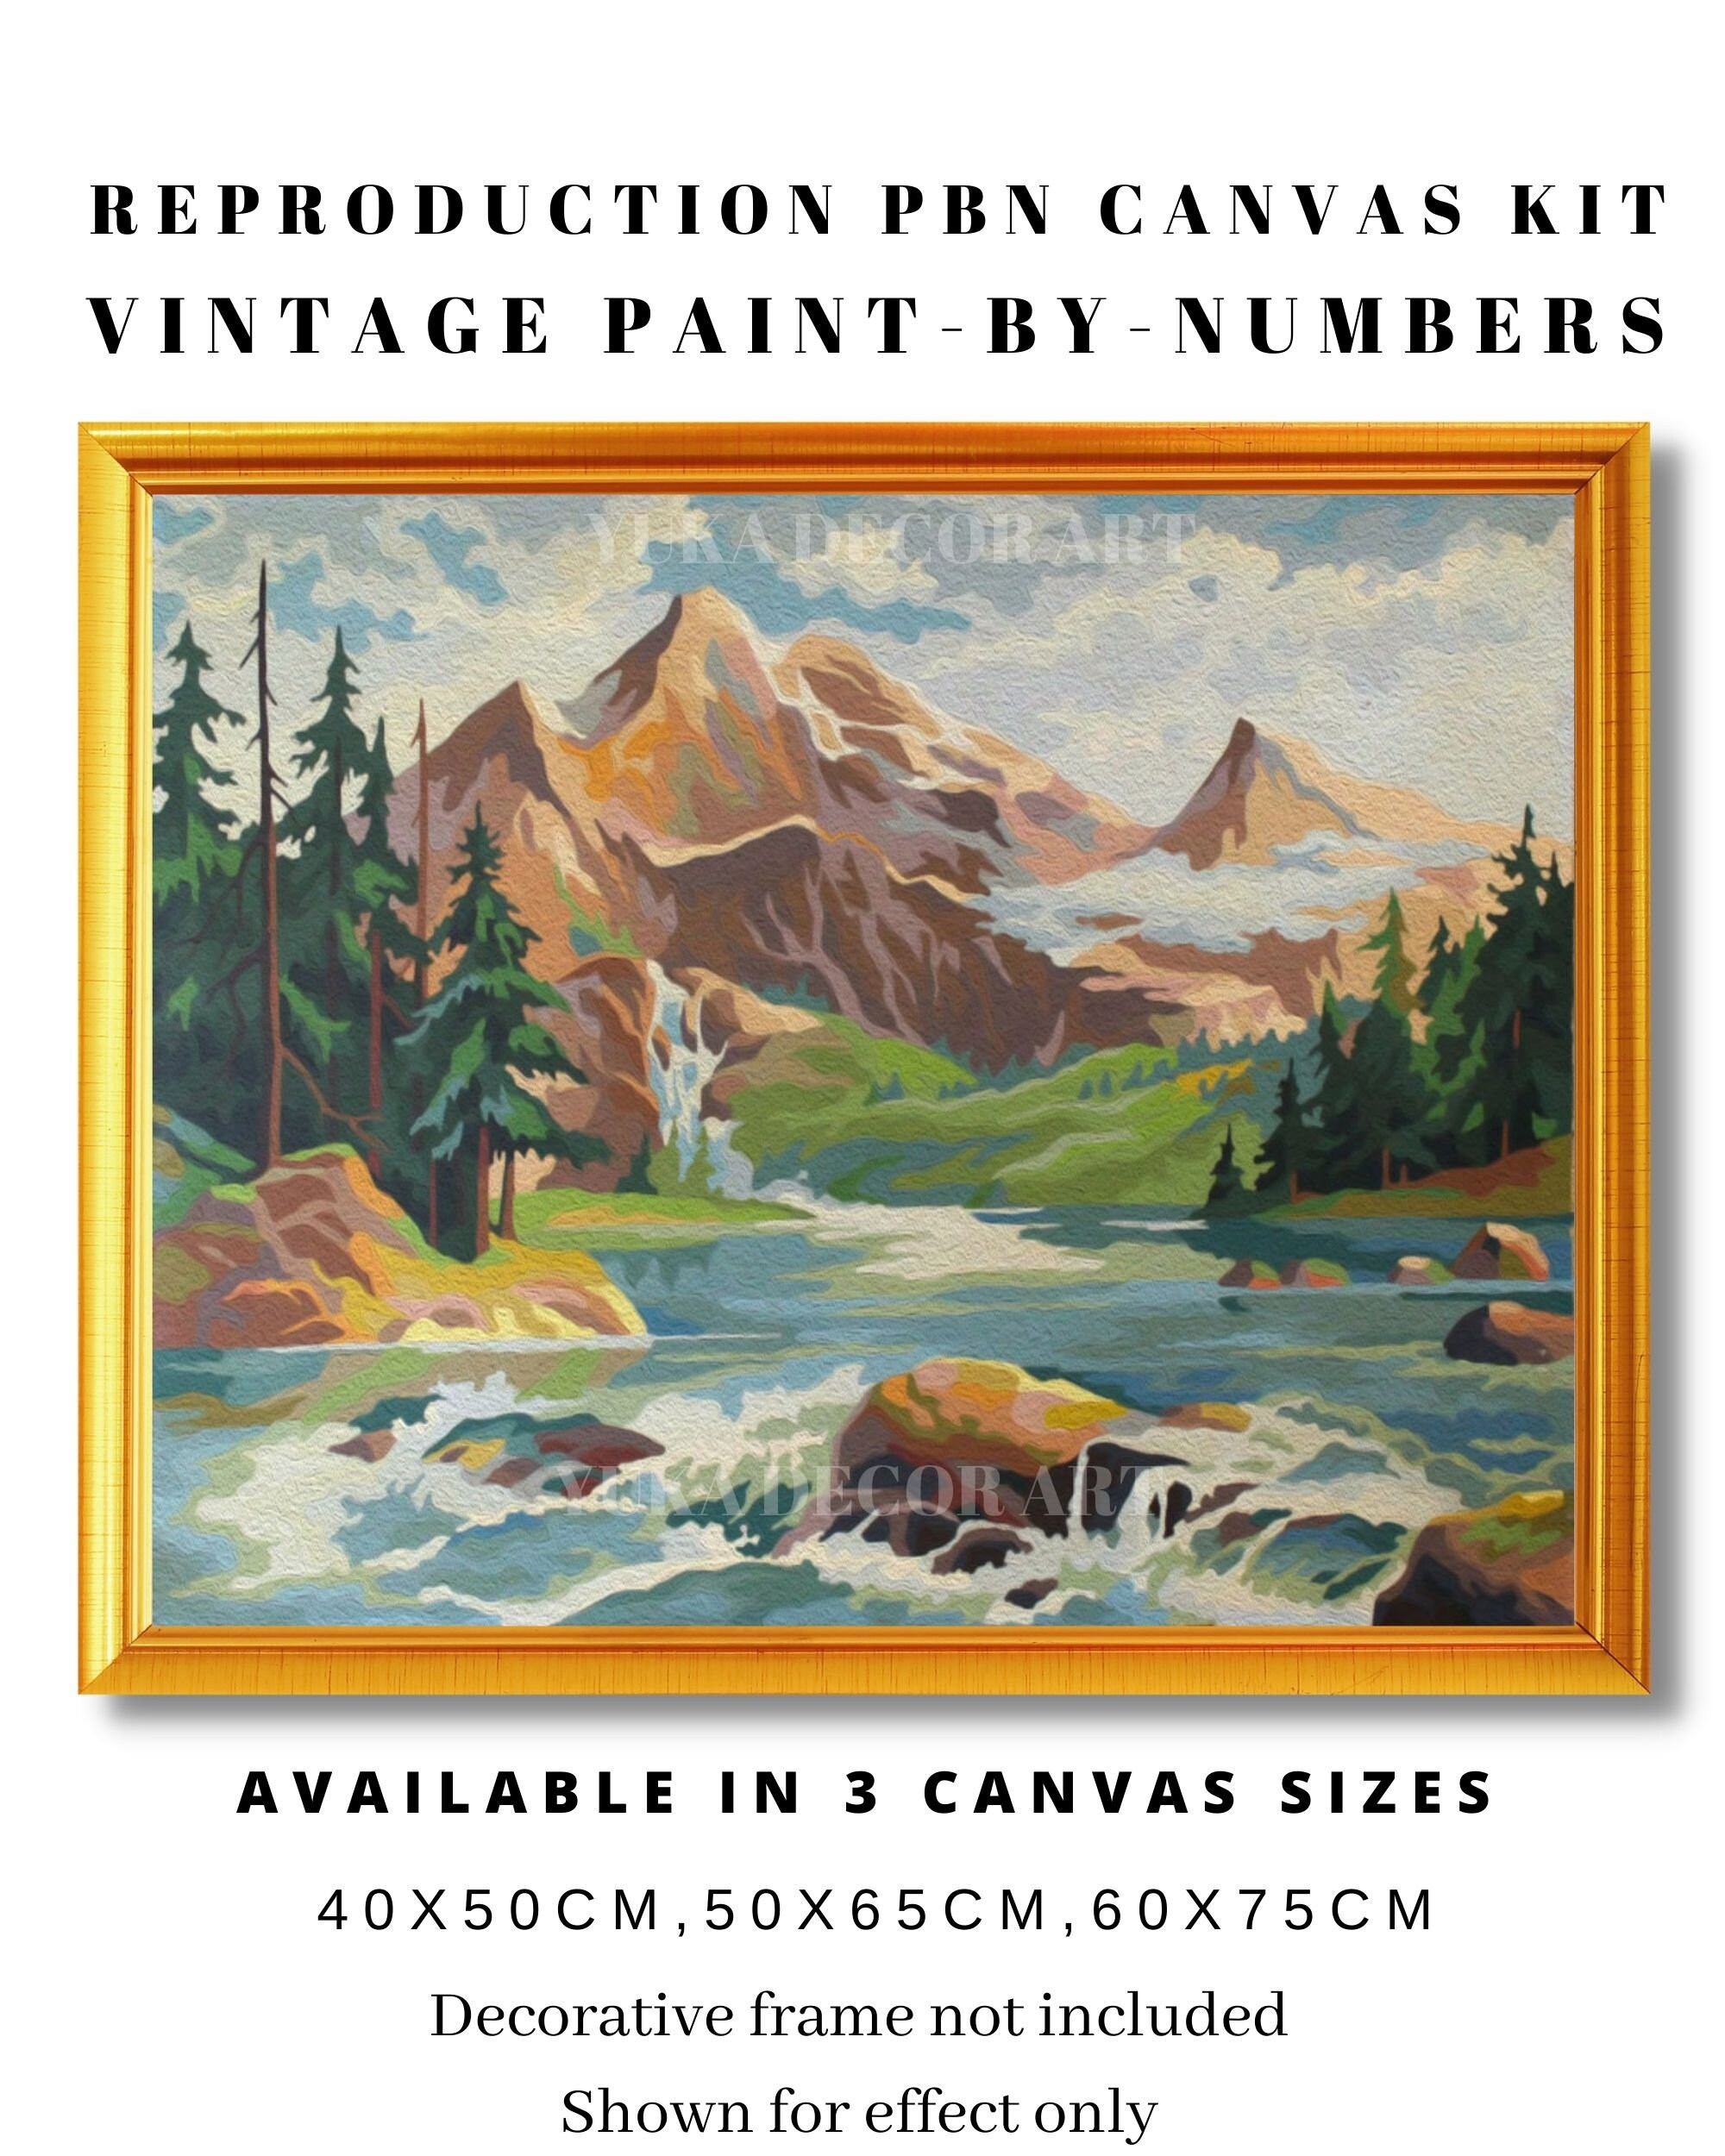 Mountain Lake Vintage Style PAINT by NUMBER Kit Adult, Valley in